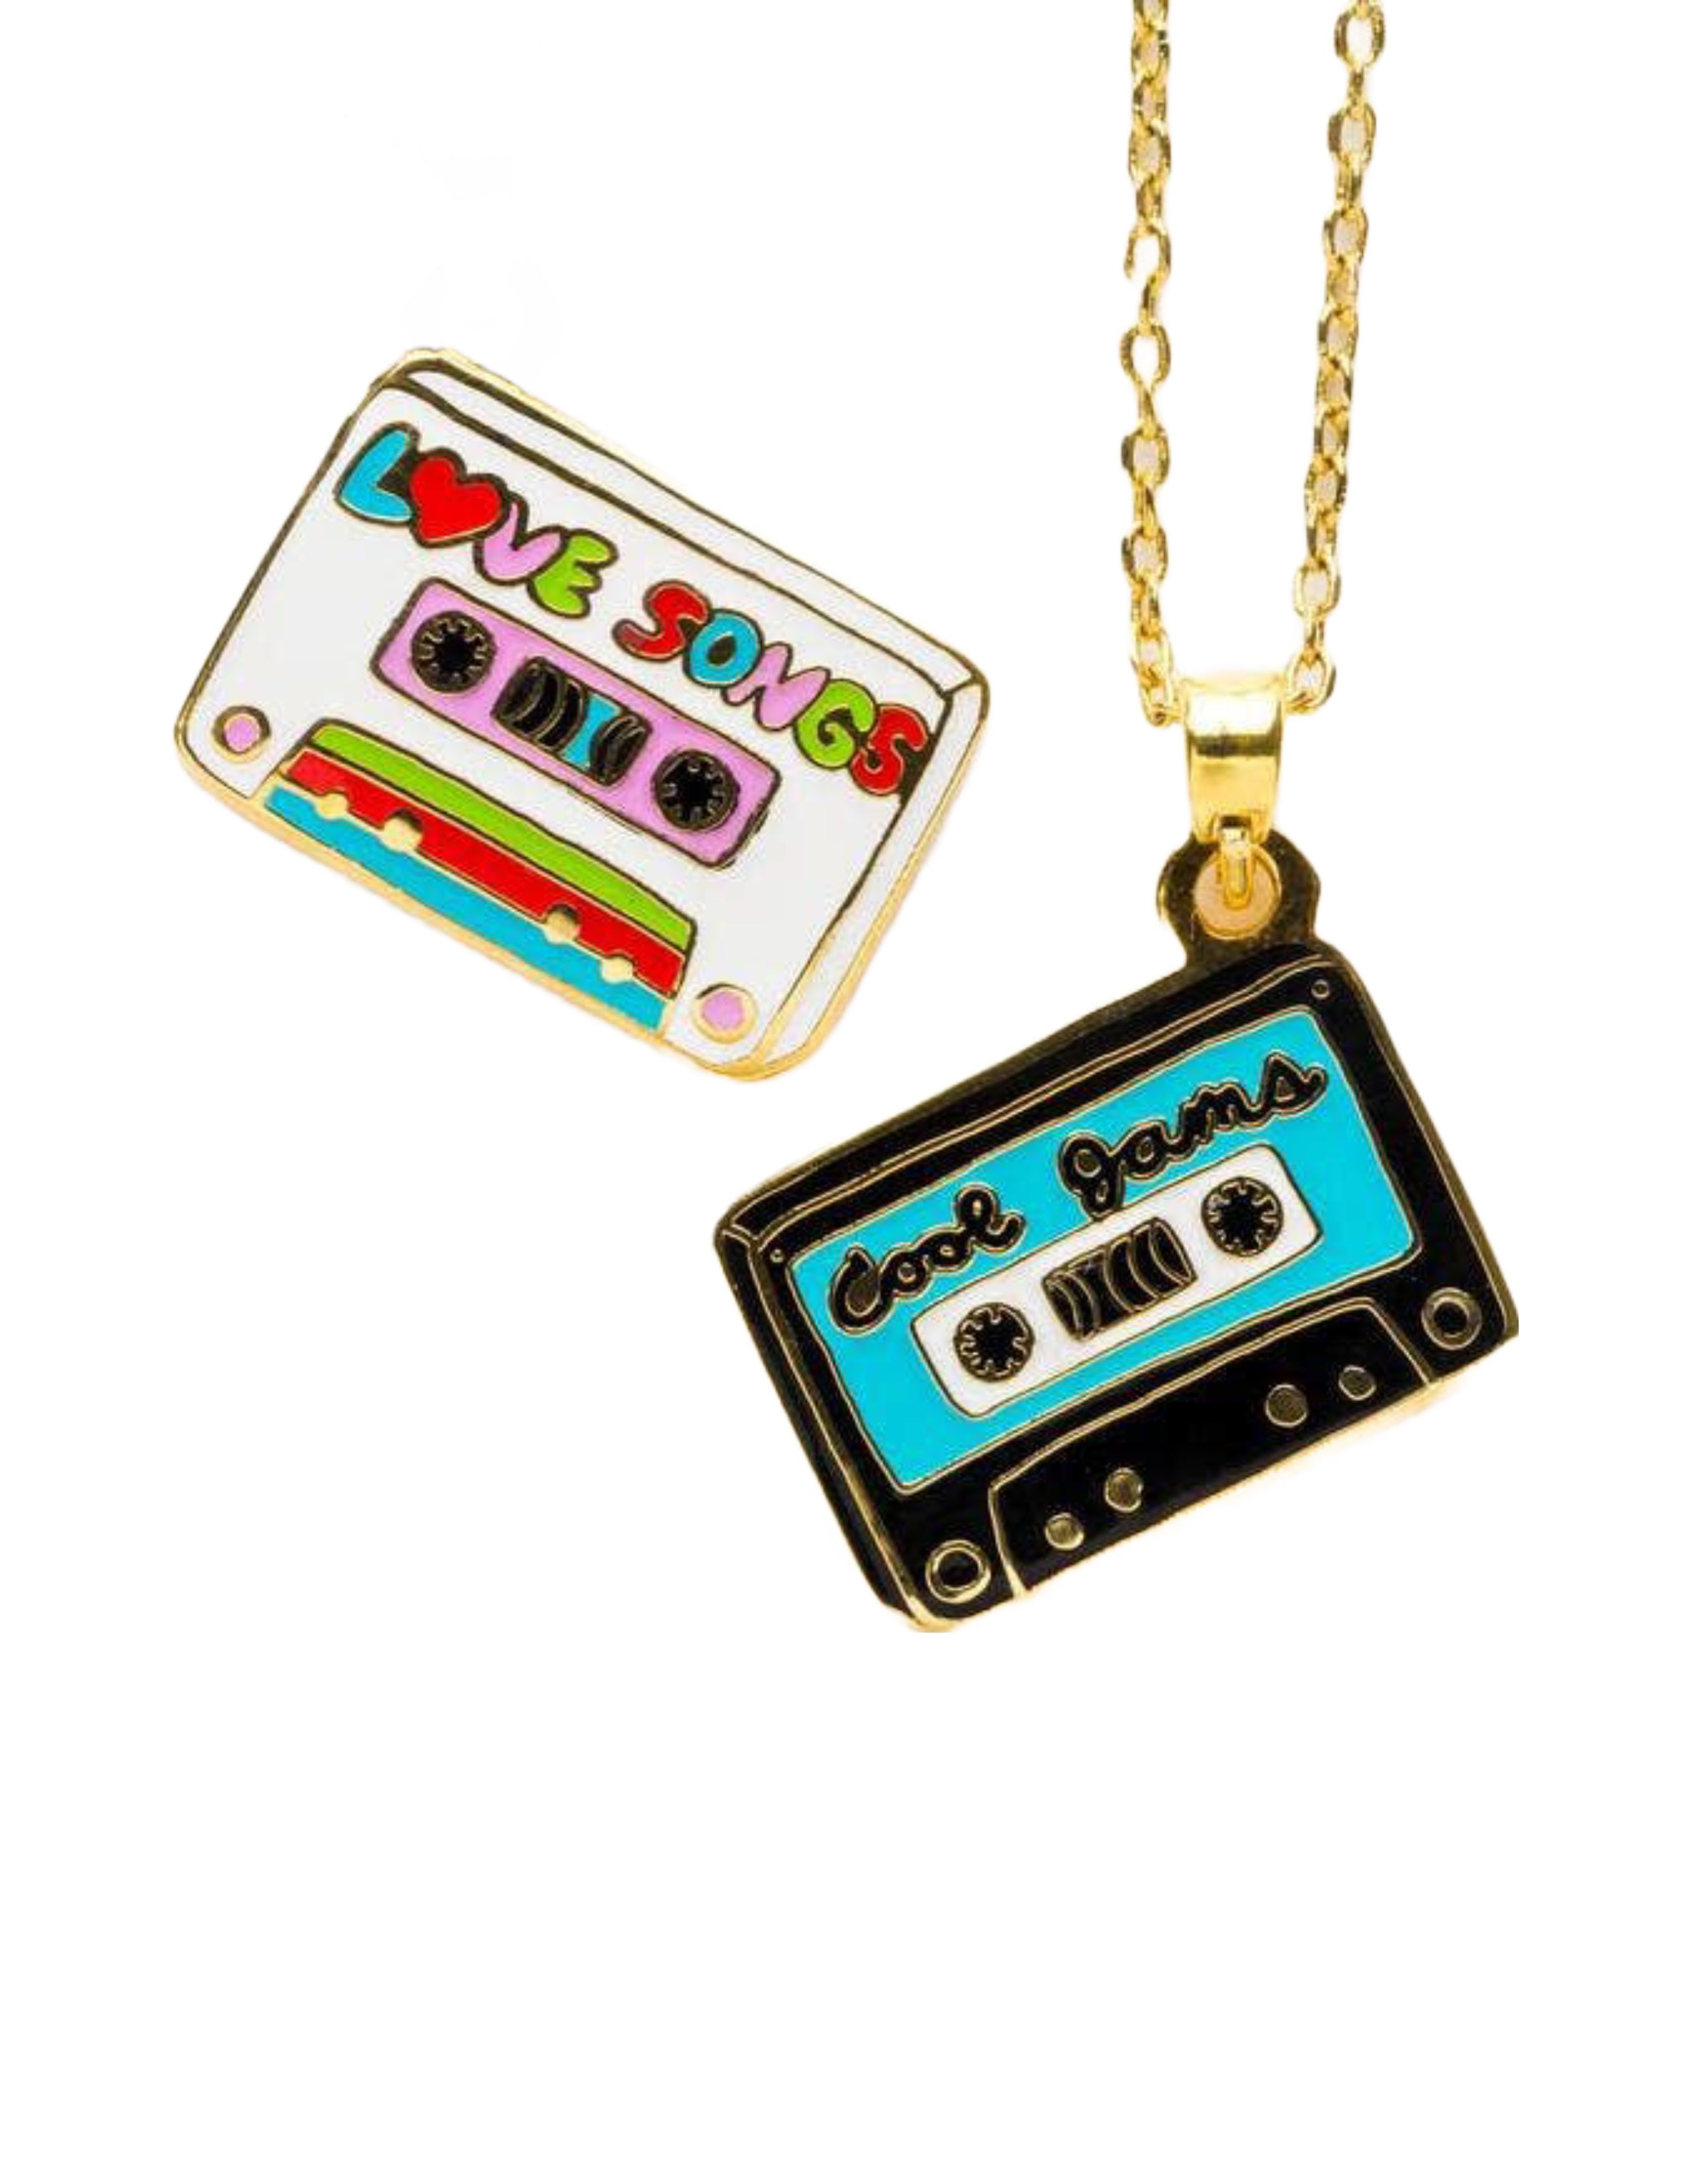 Cool Jams & Love Songs Double Sided Pendant Necklace